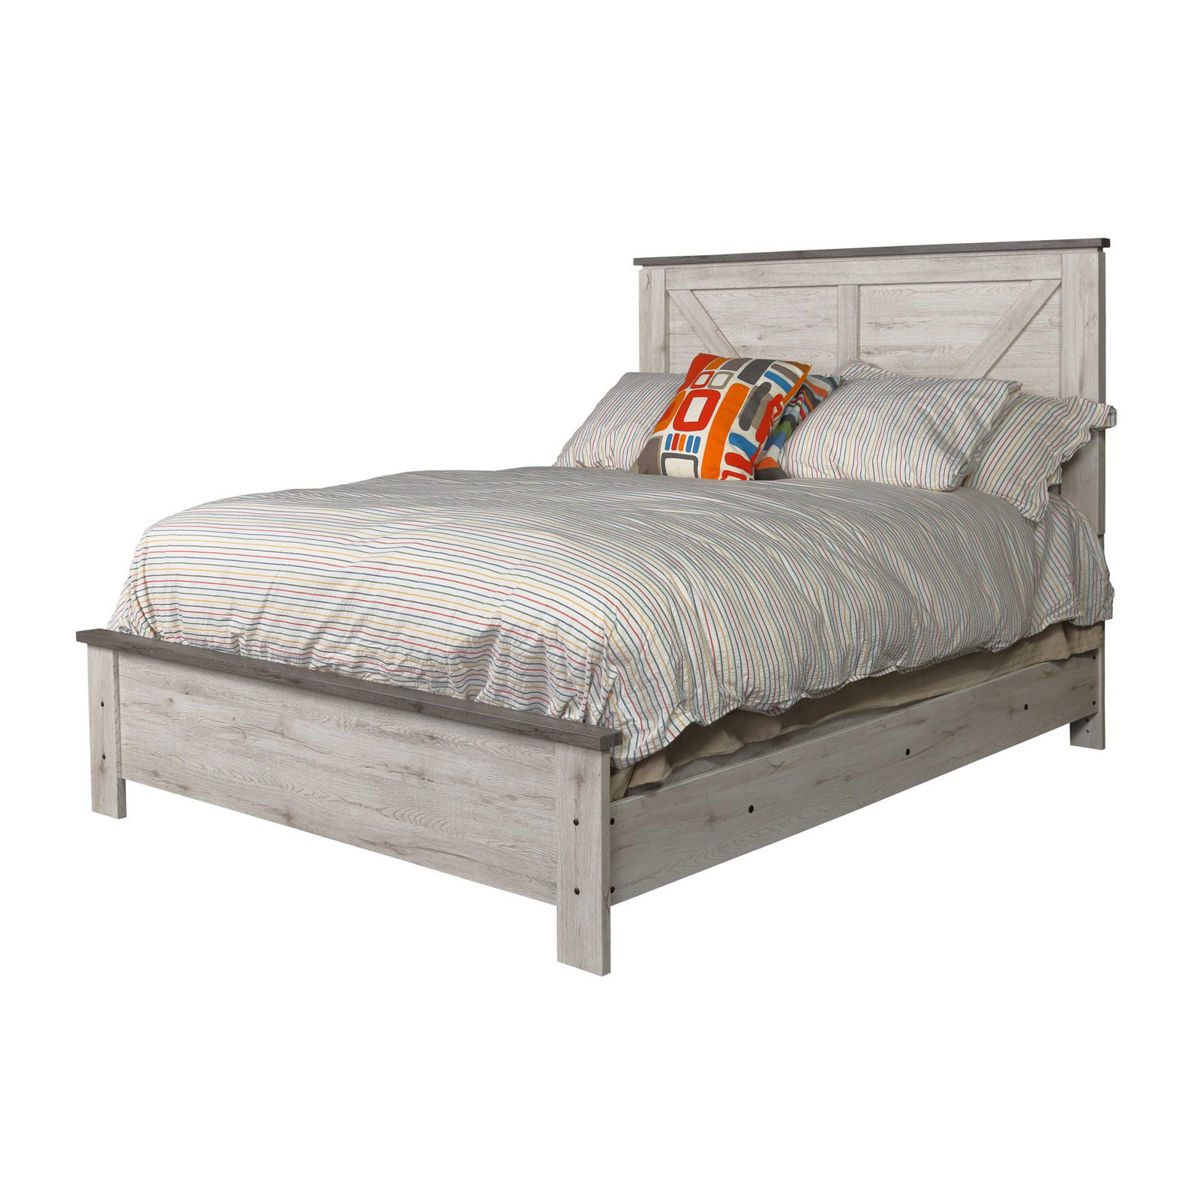 Picture of Adorna Bartex Queen Bed